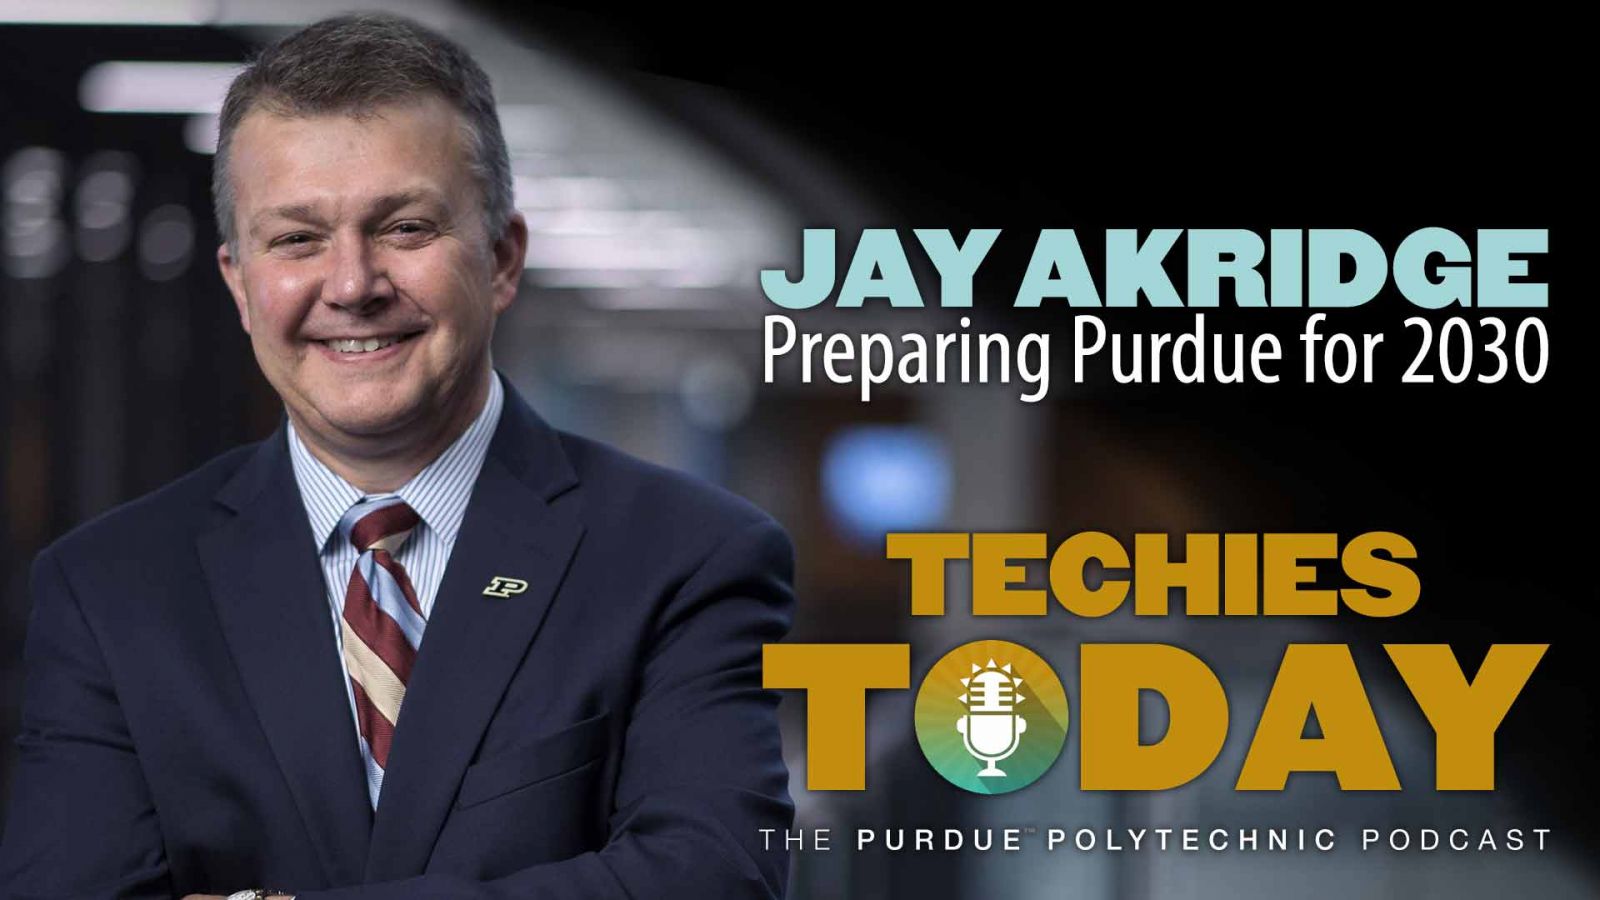 Jay Akridge, Preparing Purdue for 2030, on Techies Today, the Purdue Polytechnic Podcast